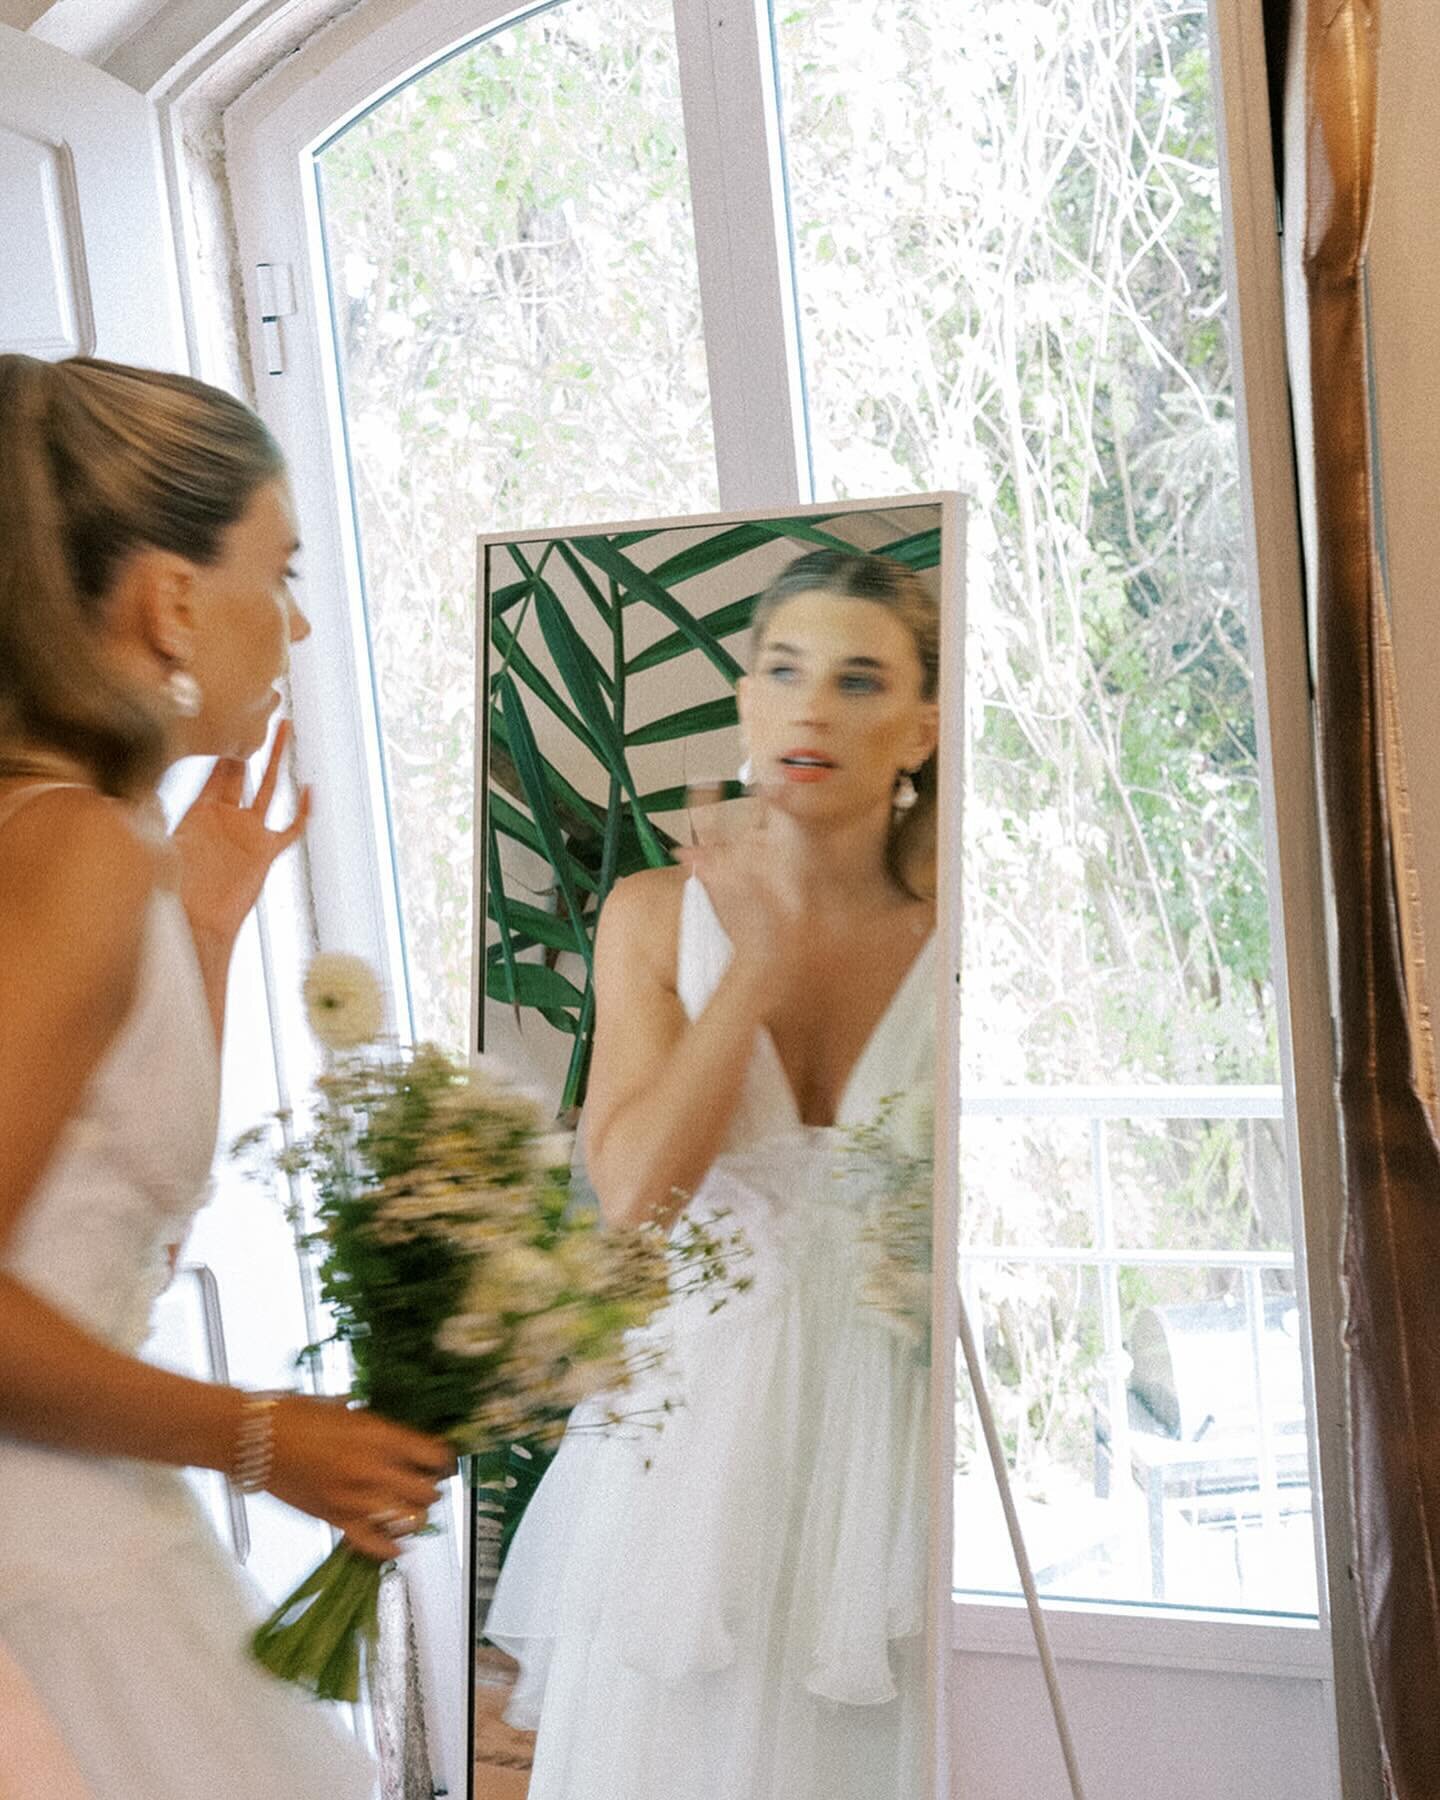 A splash of film splendour of our beautiful Anna getting ready for big day to begin. Plenty more of this gorgeous gallery to follow.

.
.

WP &amp; Styling @fernandamartinezevents 
Photographer @adrianamoraisphotography 
Catering : Pateo Velho
Floral